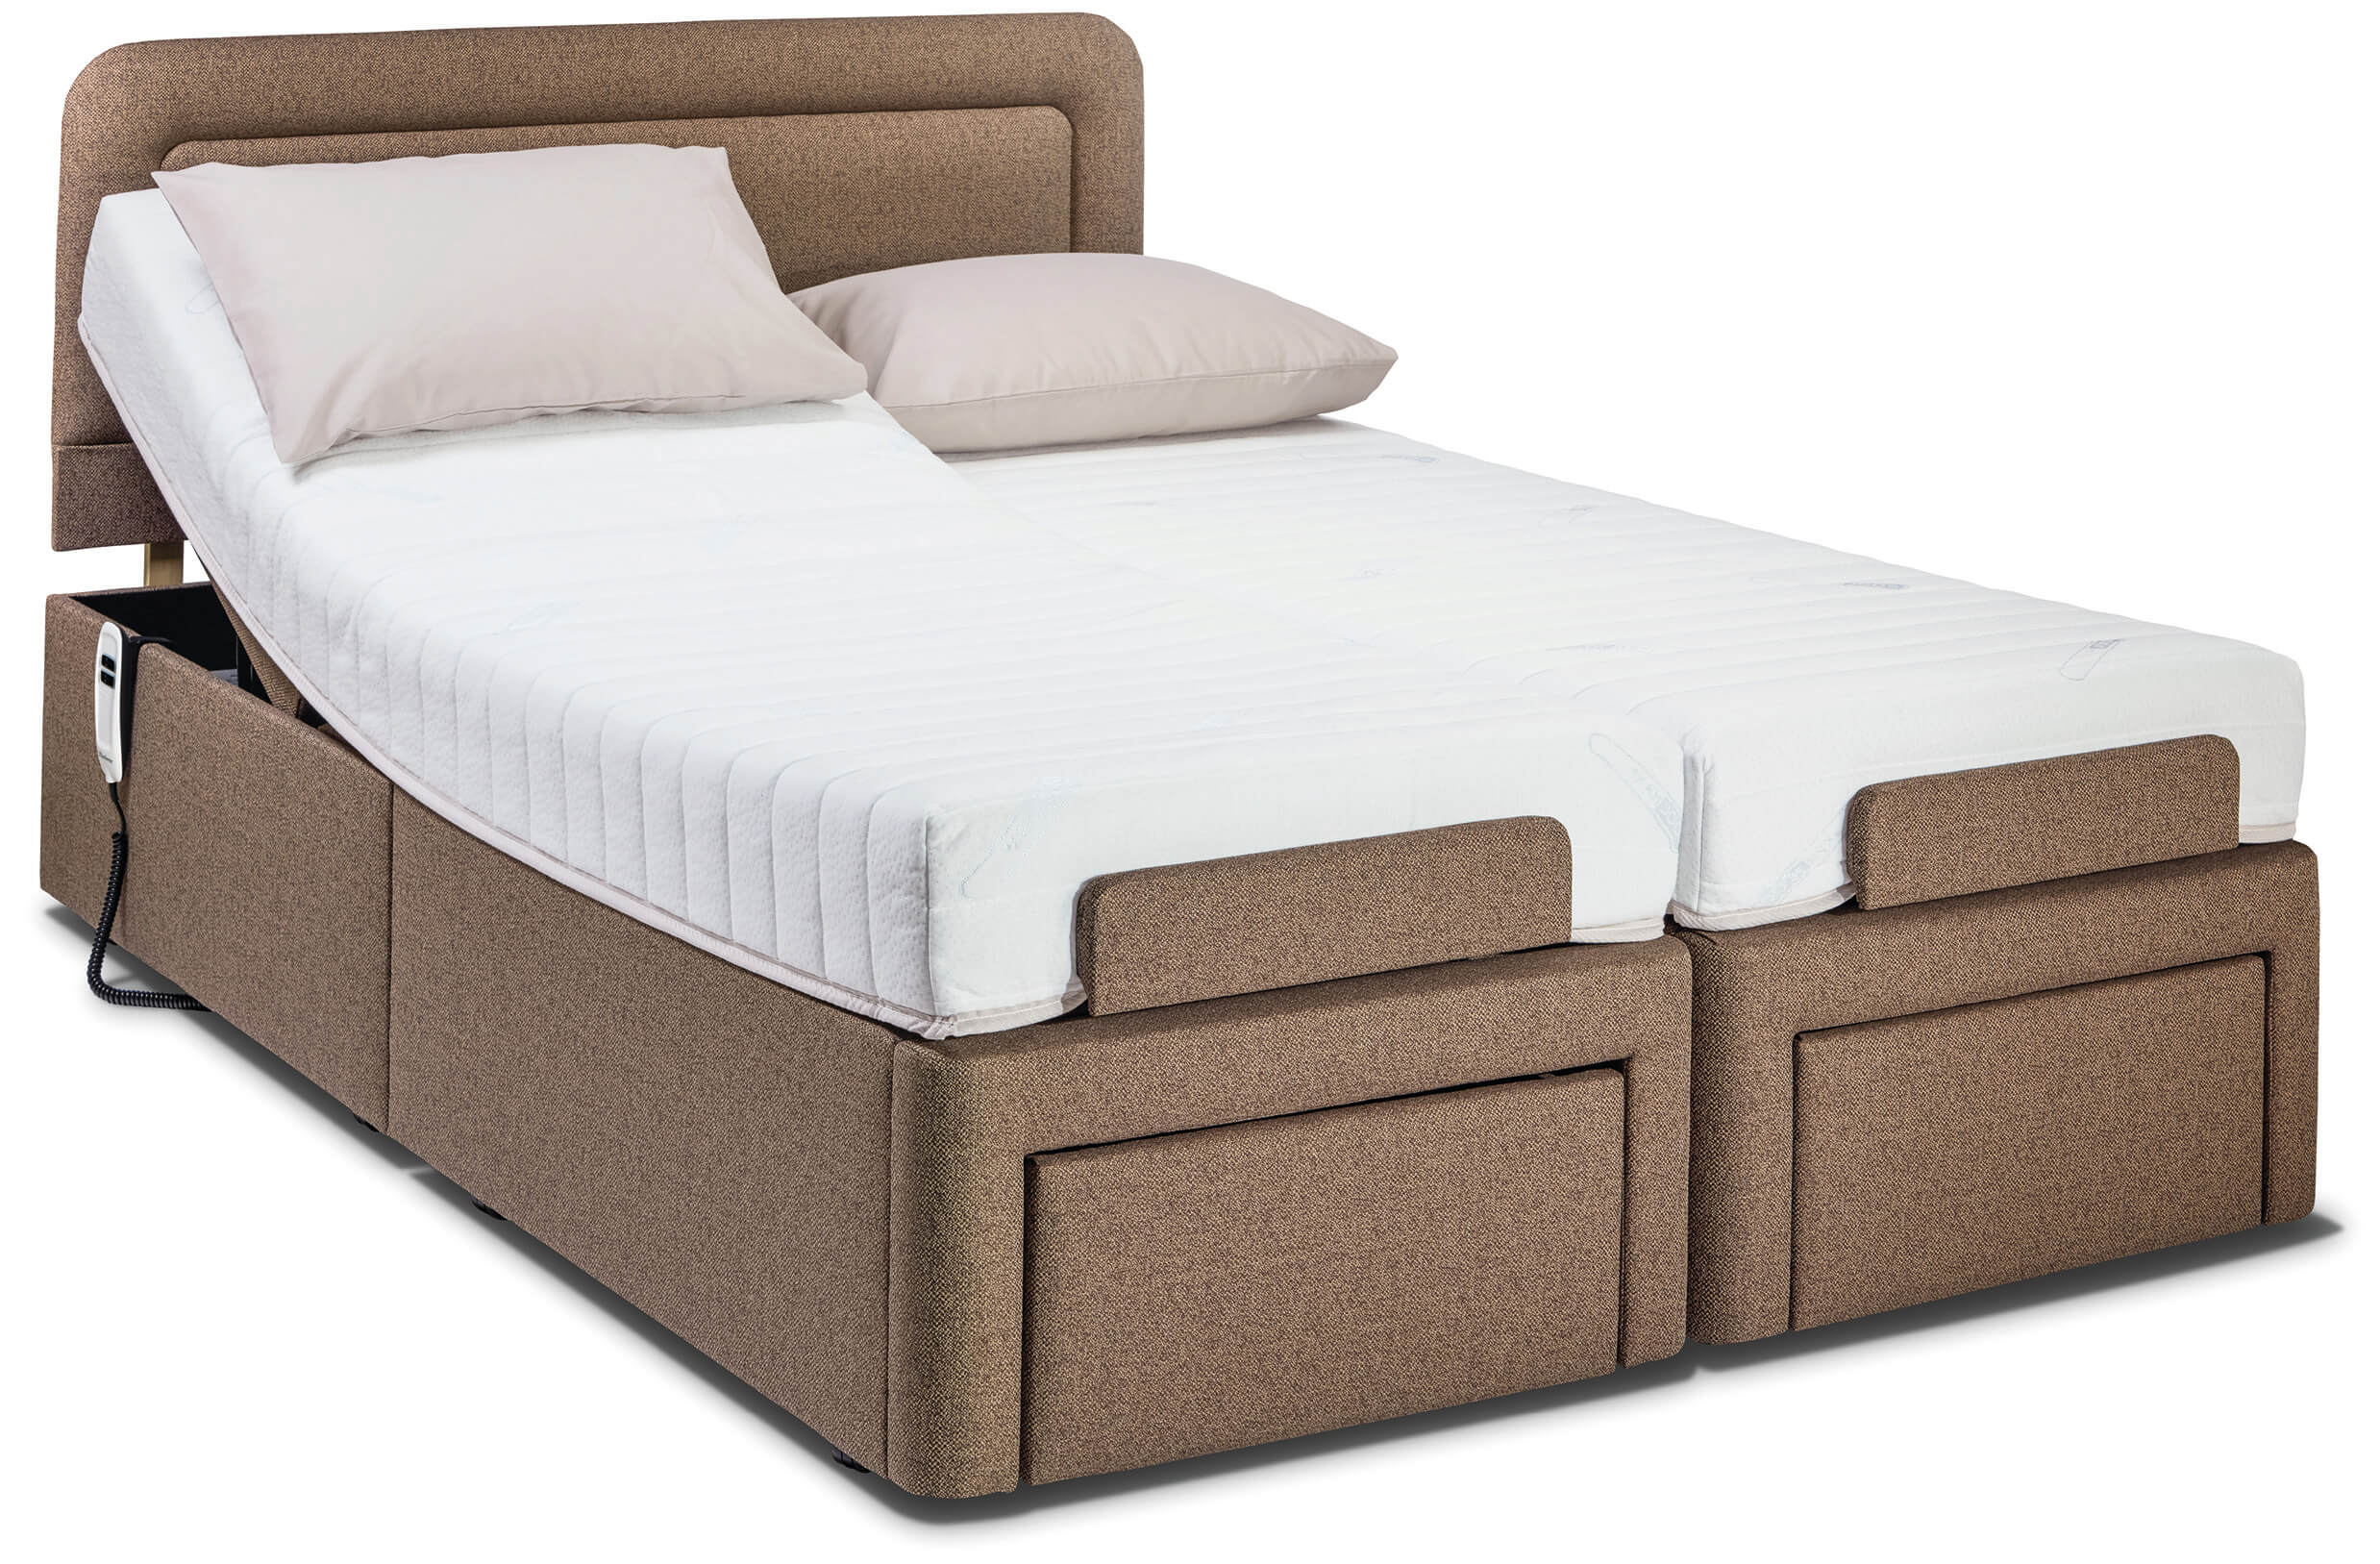 are there special mattresses for adjustable beds